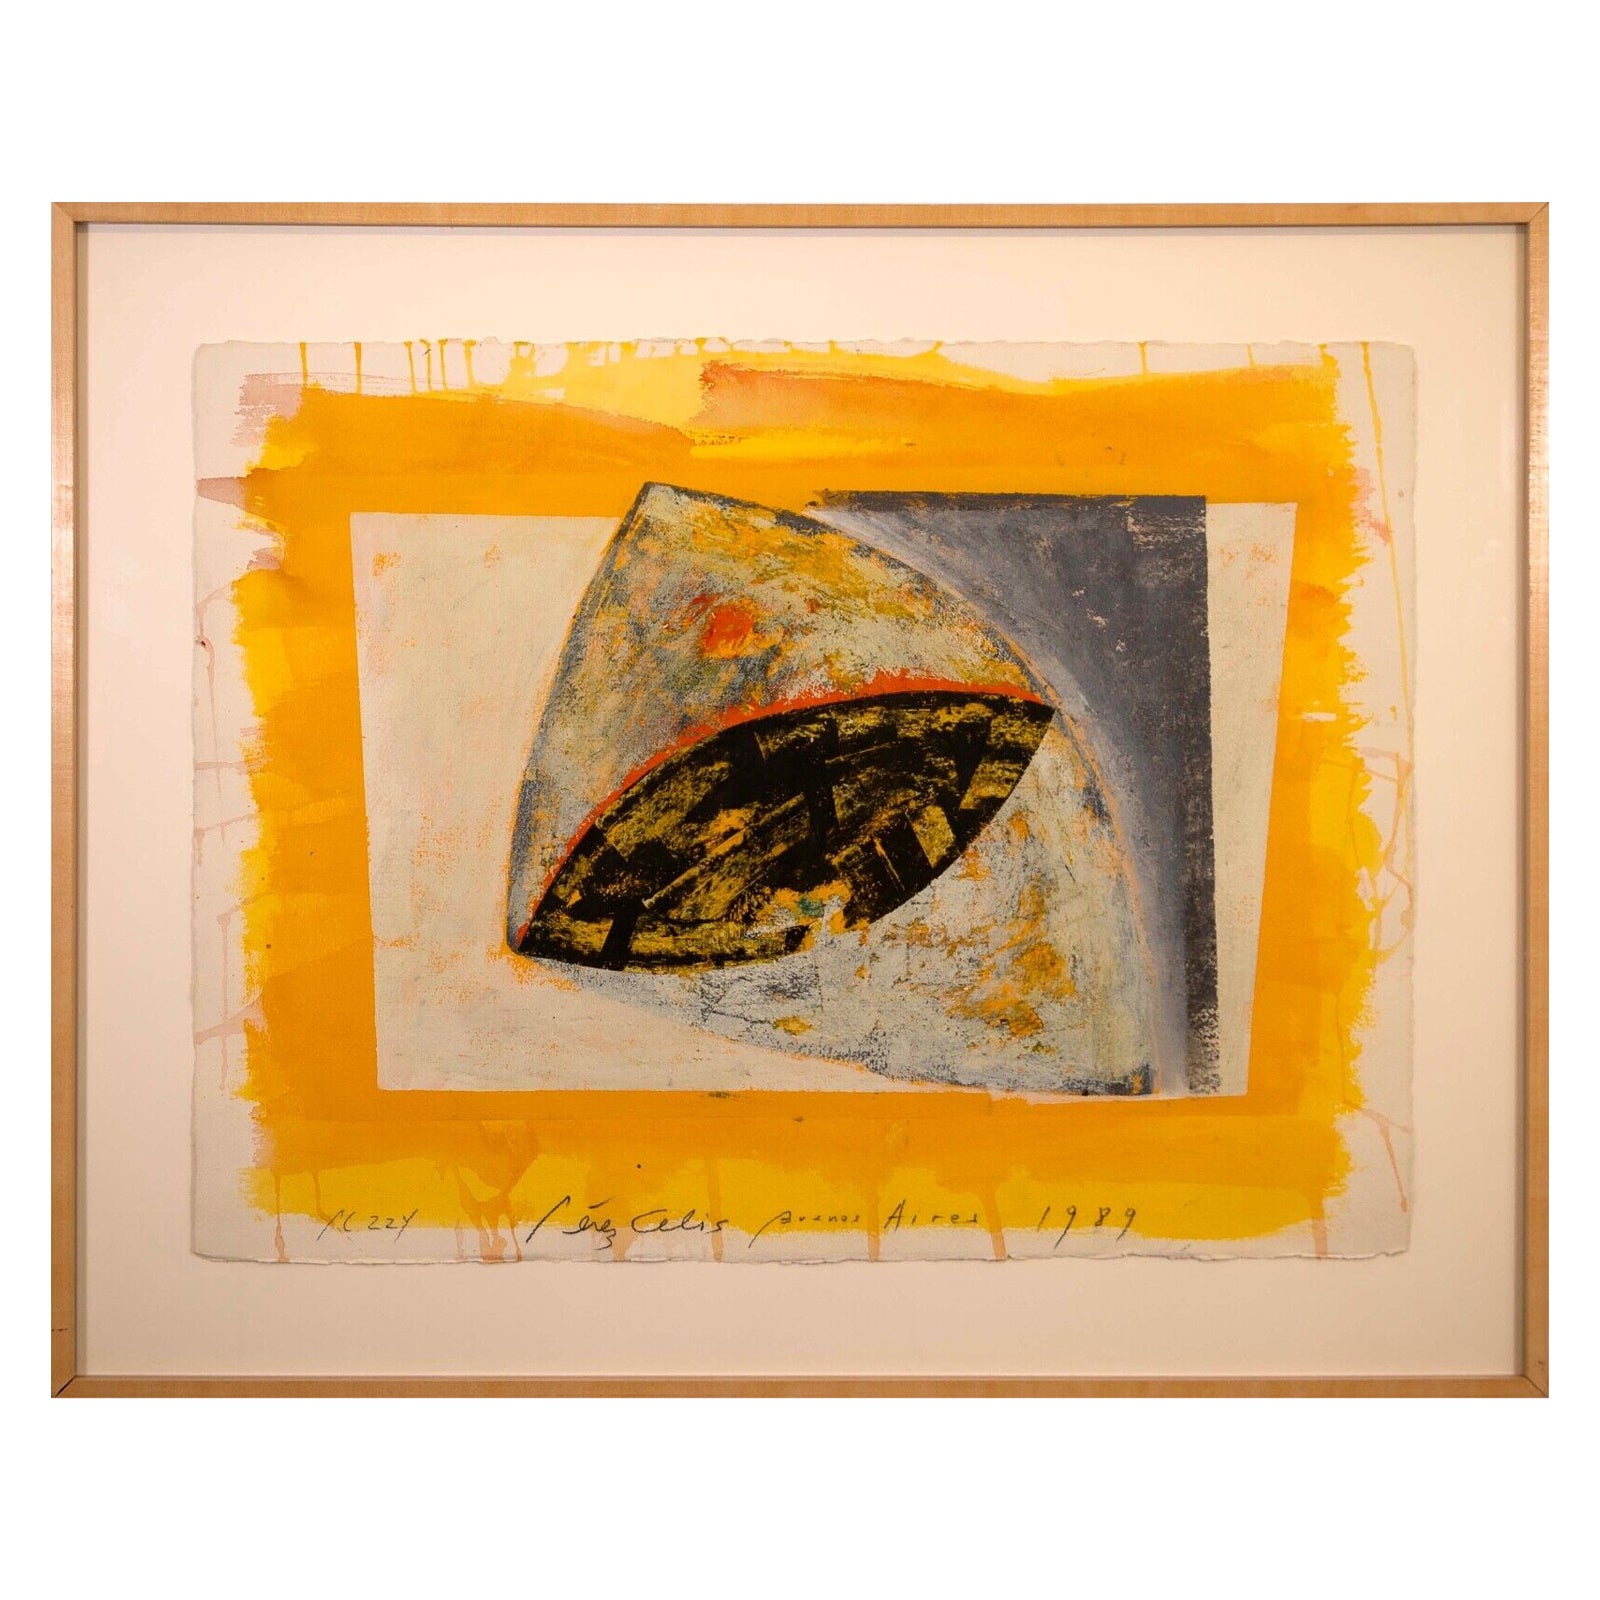 Perez Celis Buenos Aires Abstract Oil Painting on Paper 1989 For Sale